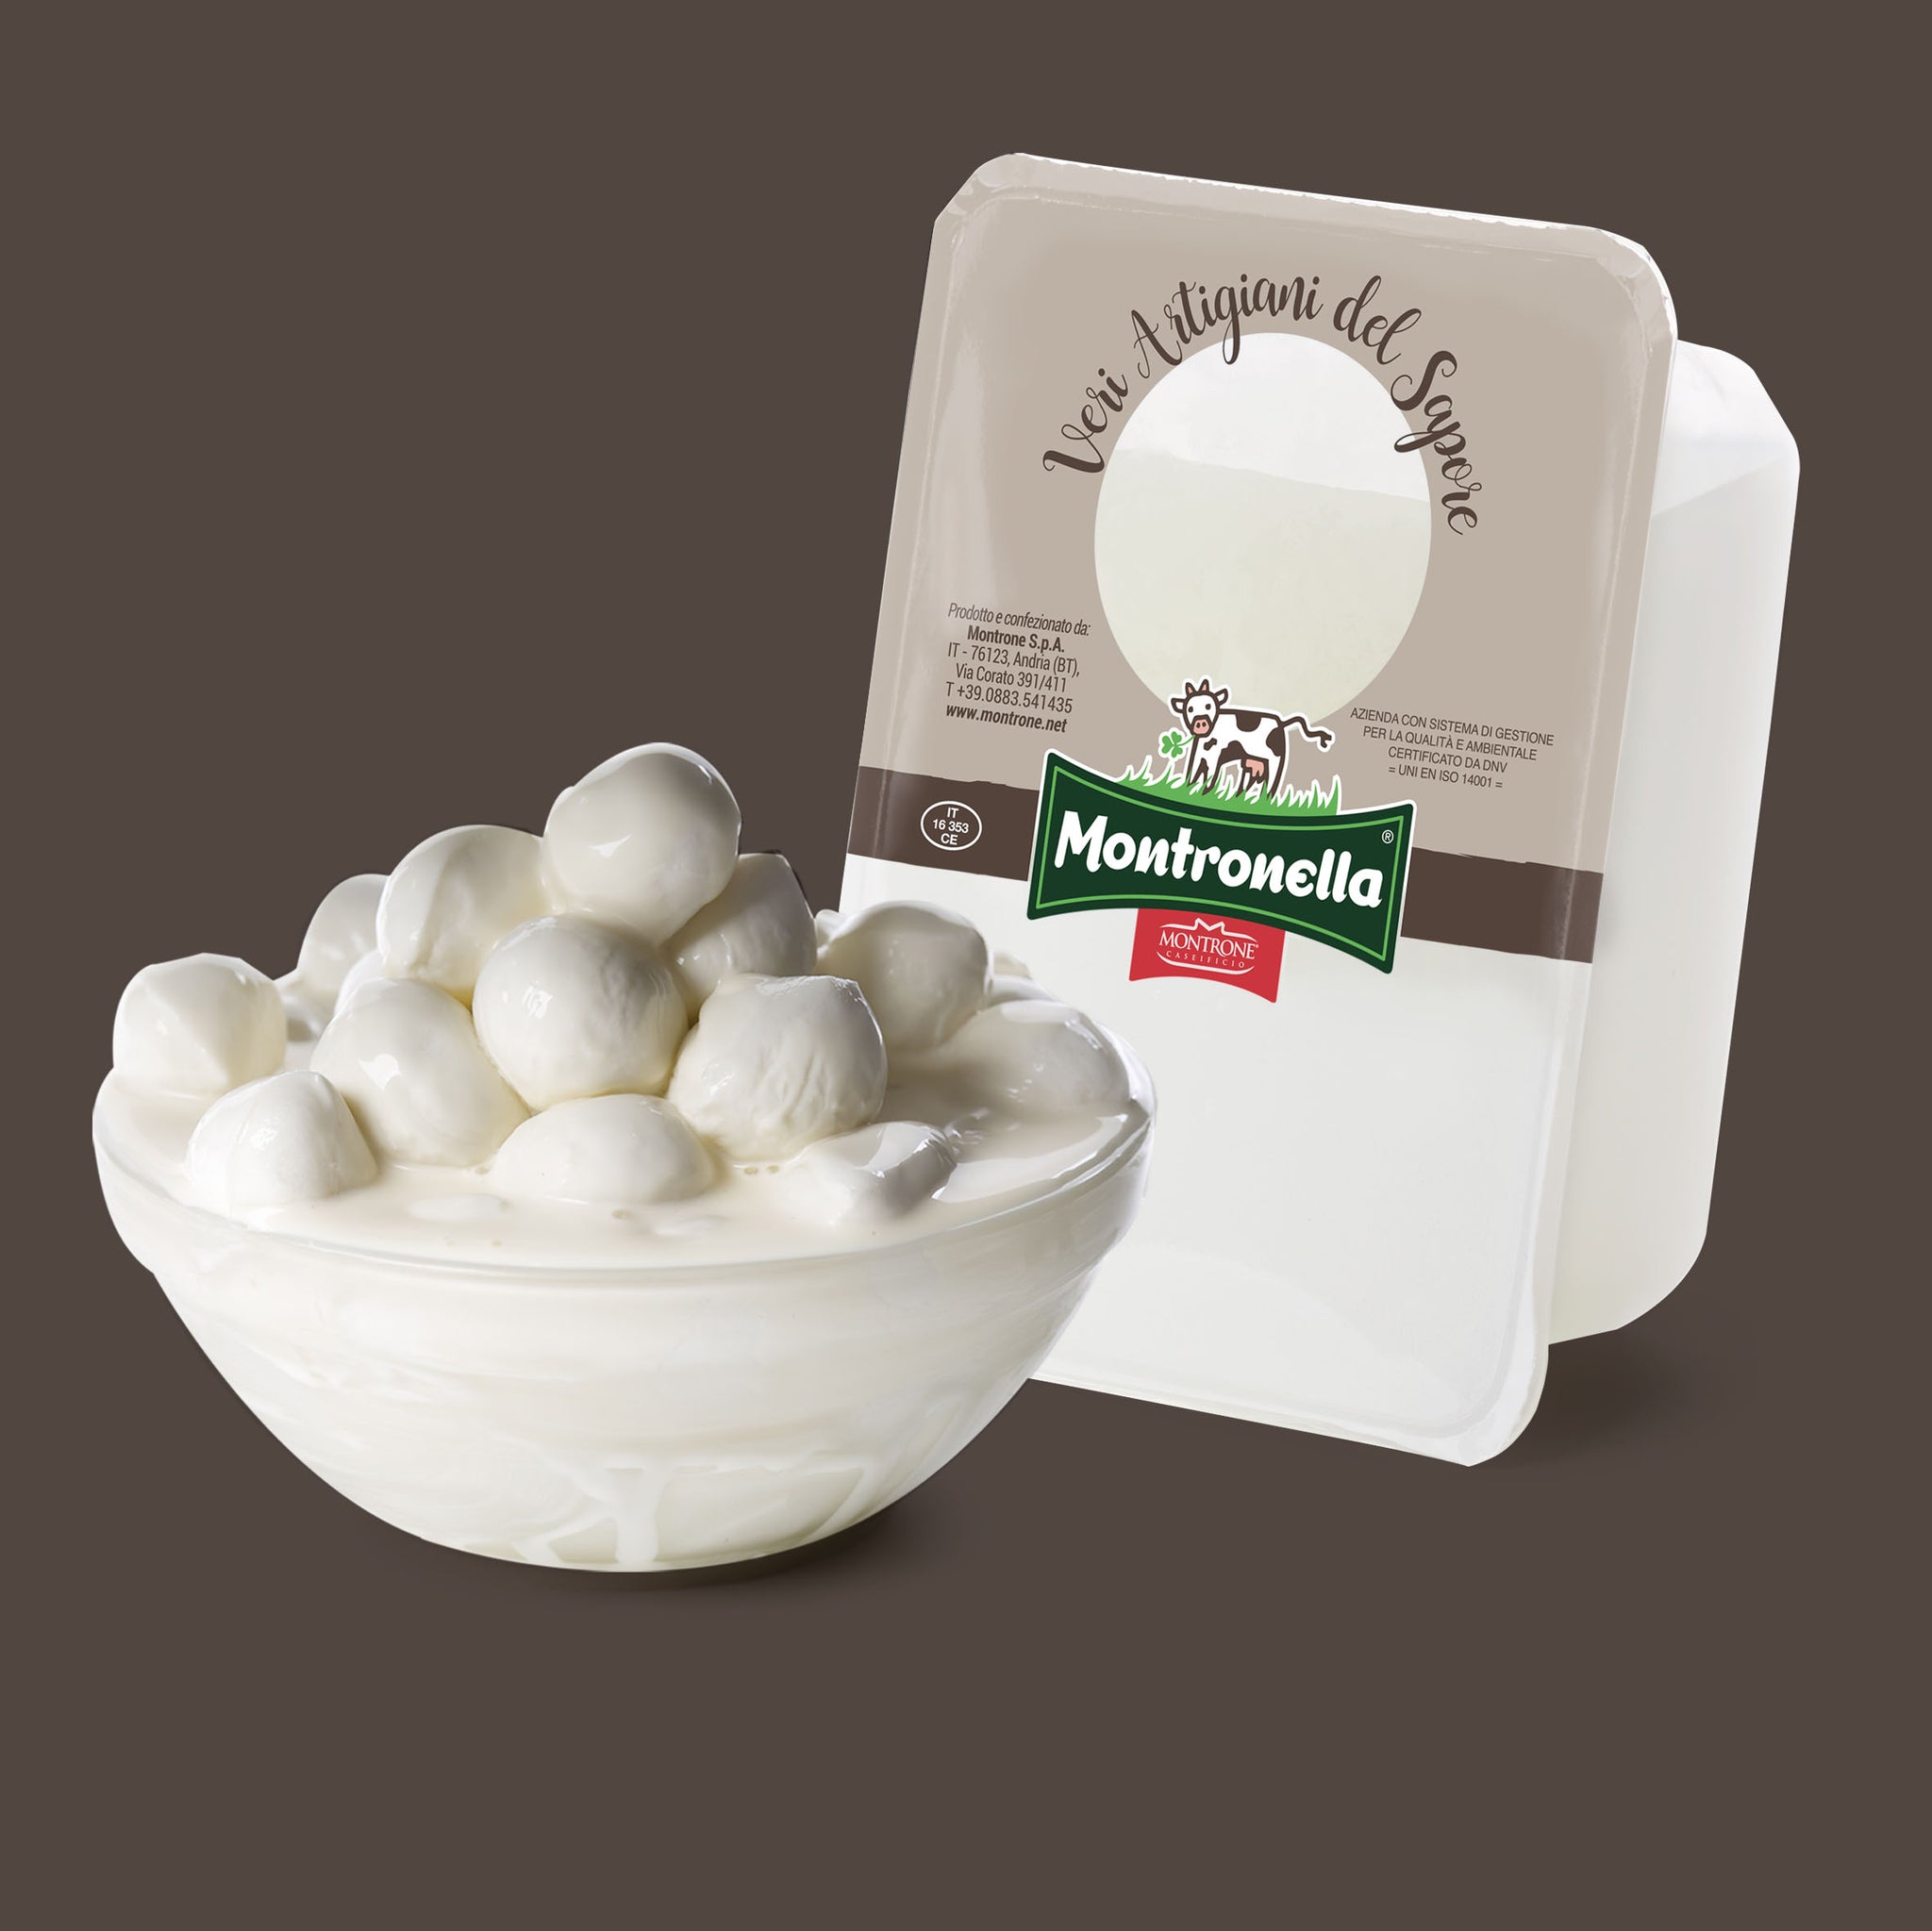 Bocconcini with white cream 10g x 250g tray